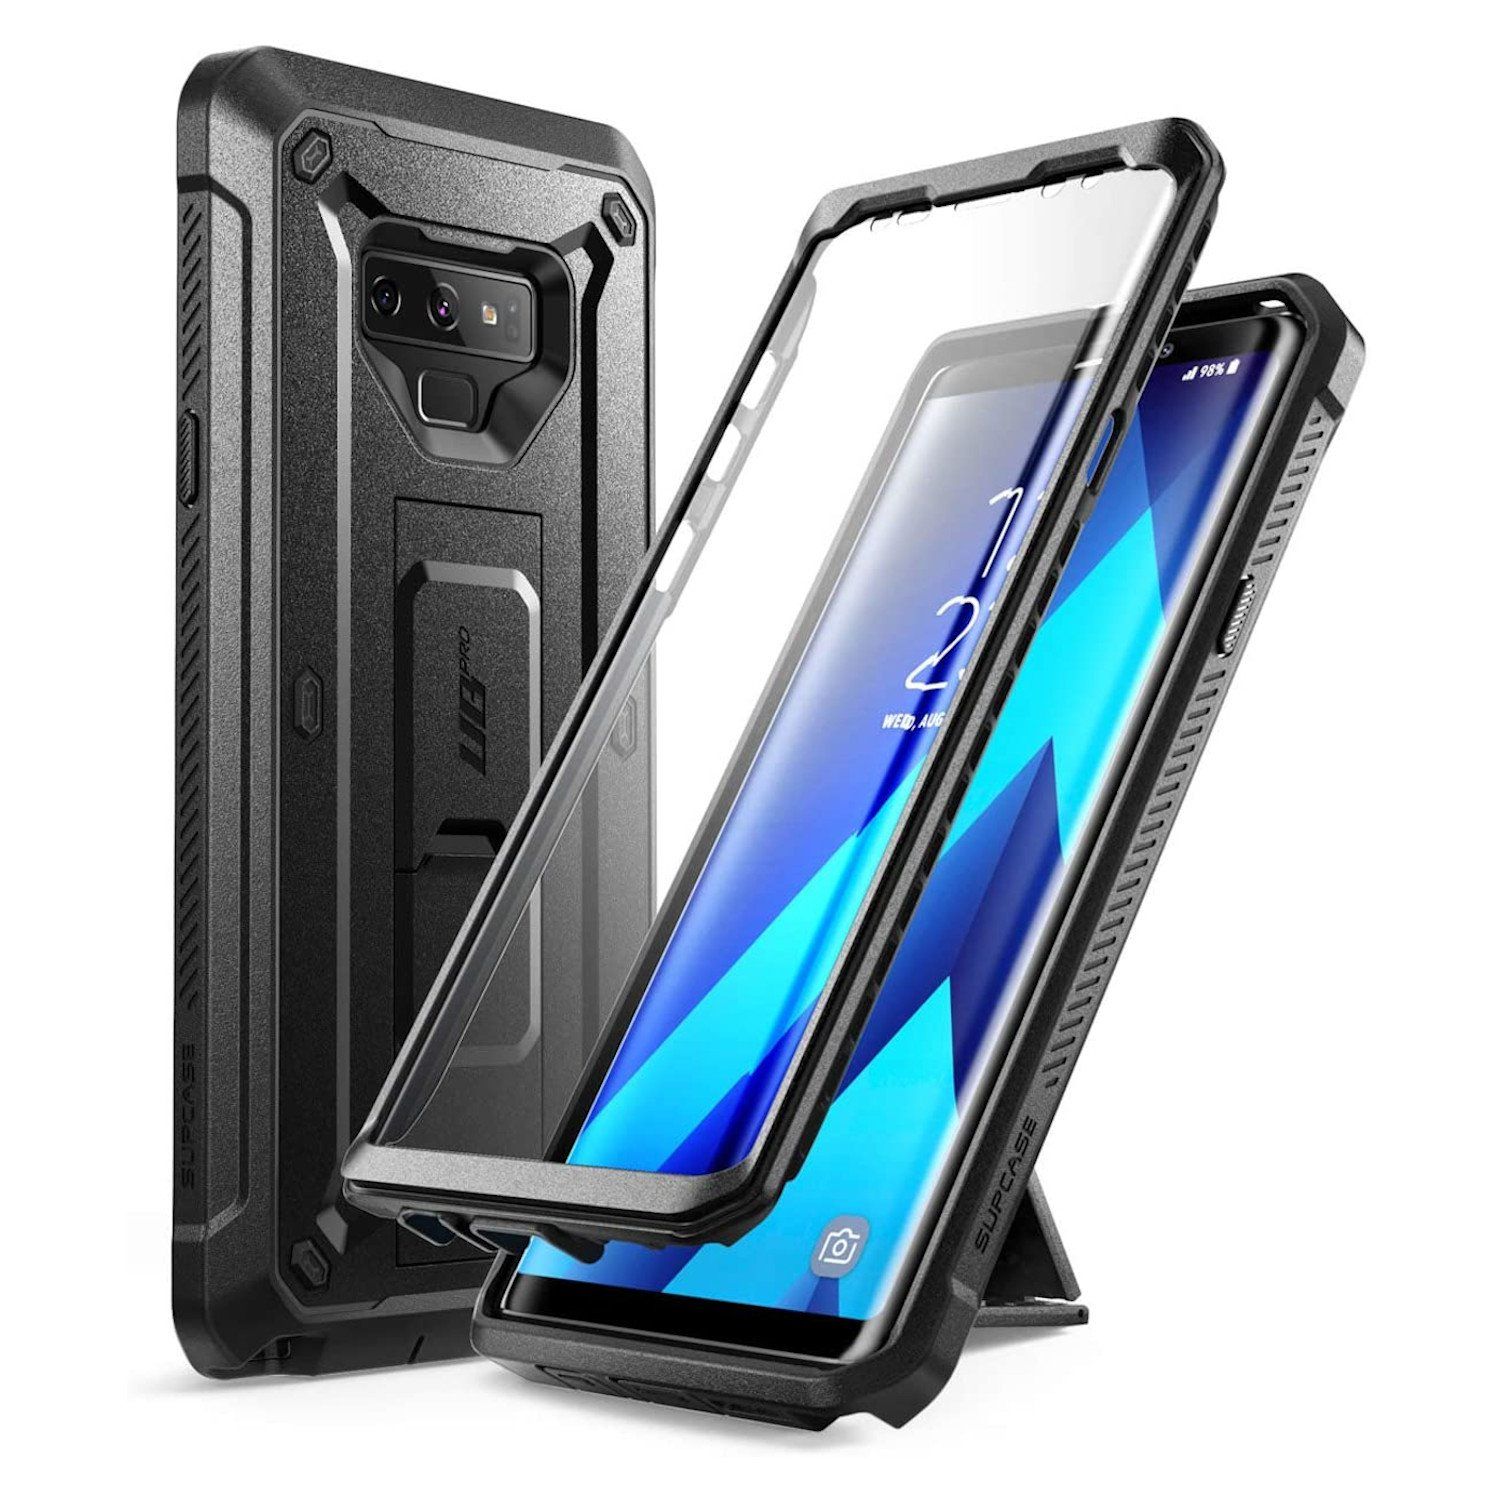 Supcase UB Pro Series Full-Body Rugged Holster Case for Samsung Galaxy Note 9(With Build-in Screen Protector), Black Samsung Case Supcase Black 